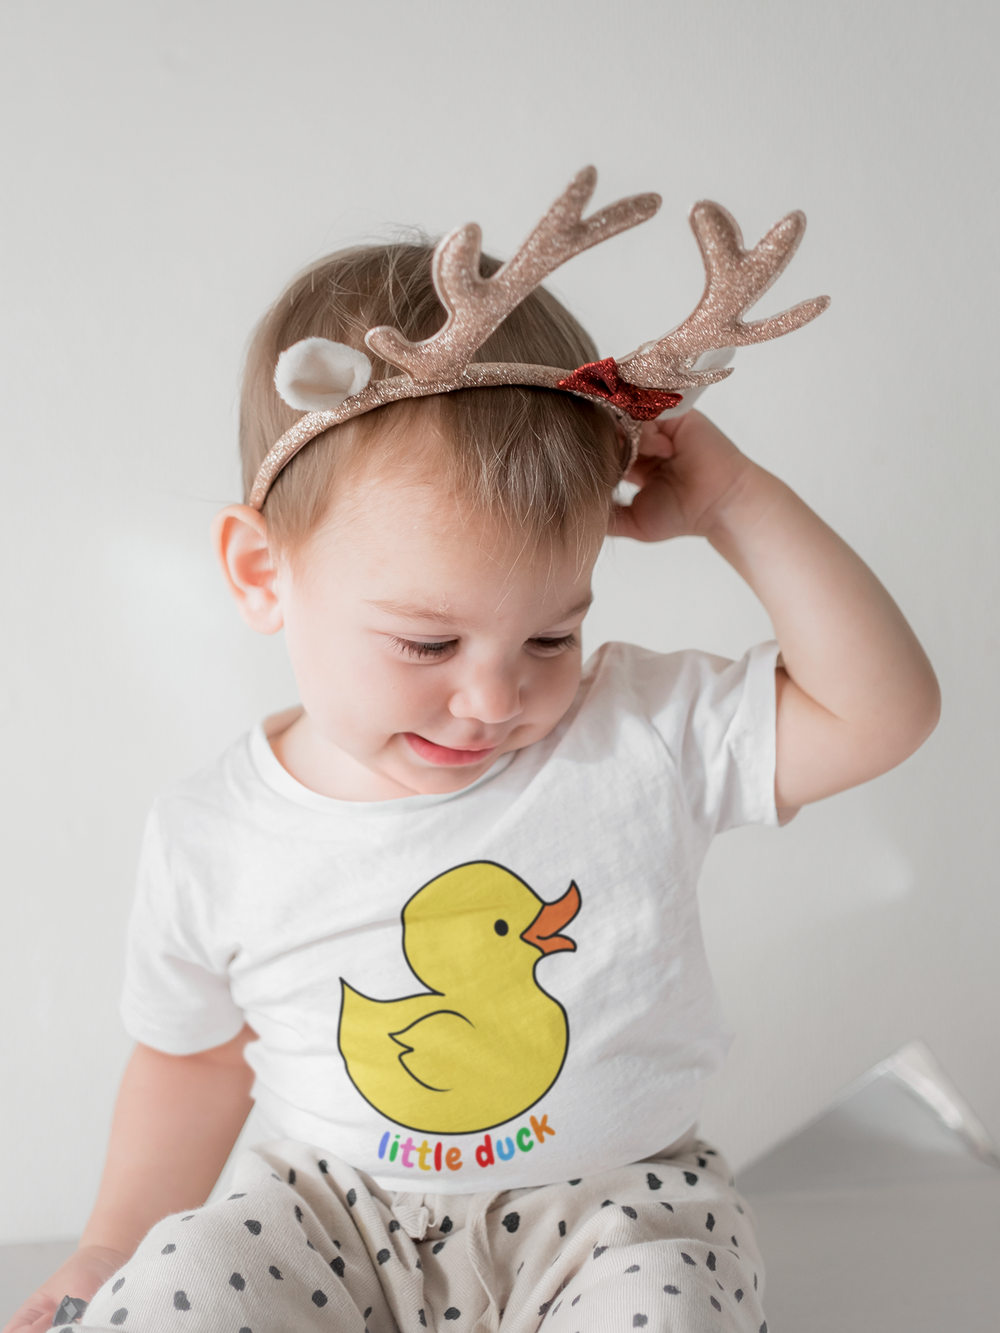 Duck tshirt, Cute tshirts for Kids, MyVoxSongs merch tees for toddler, baby girl, baby boy, baby shower & birthday gifts